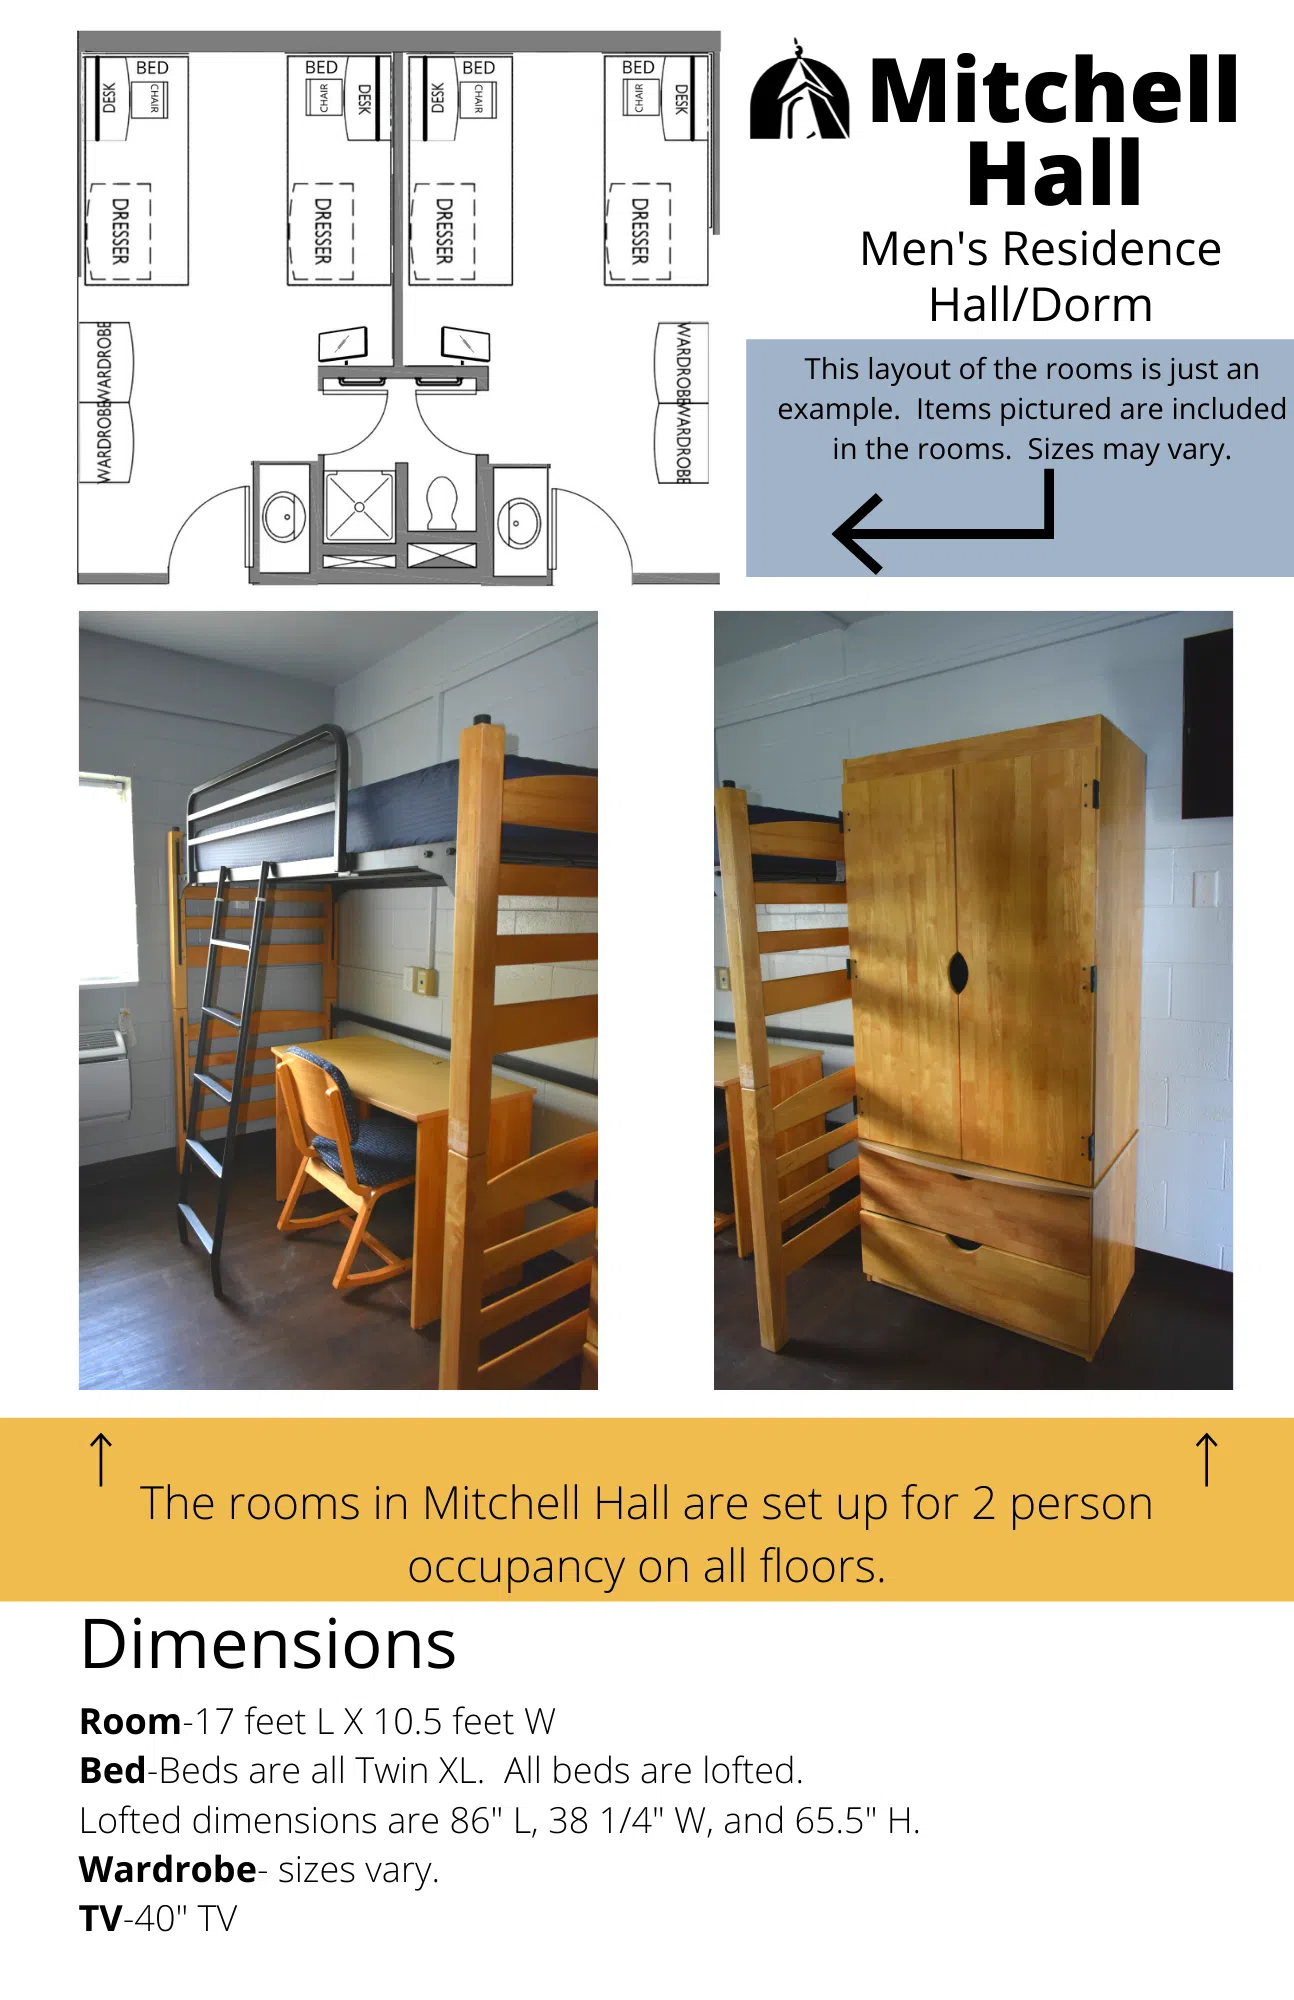 Informational Sheet for Mitchell Residence Hall with Pictures and room specifications.